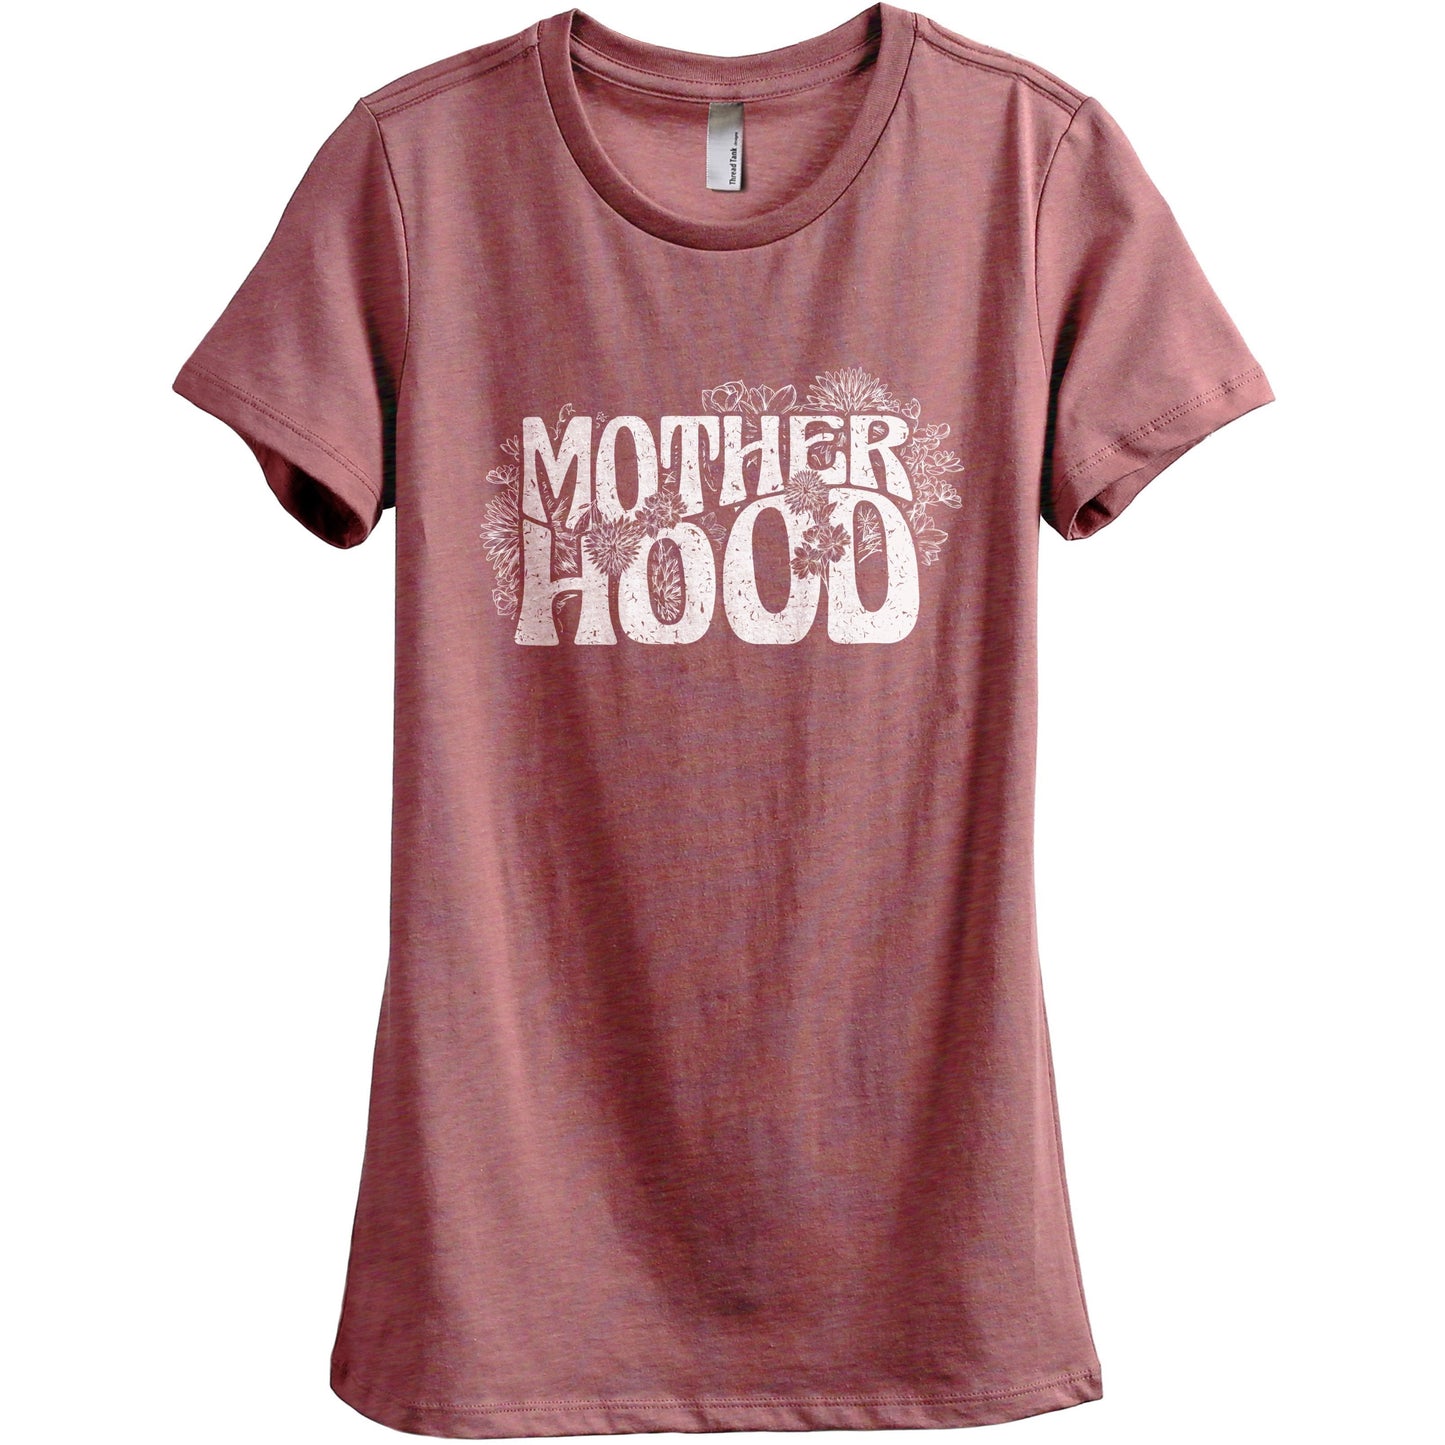 Blooming Motherhood - Stories You Can Wear by Thread Tank